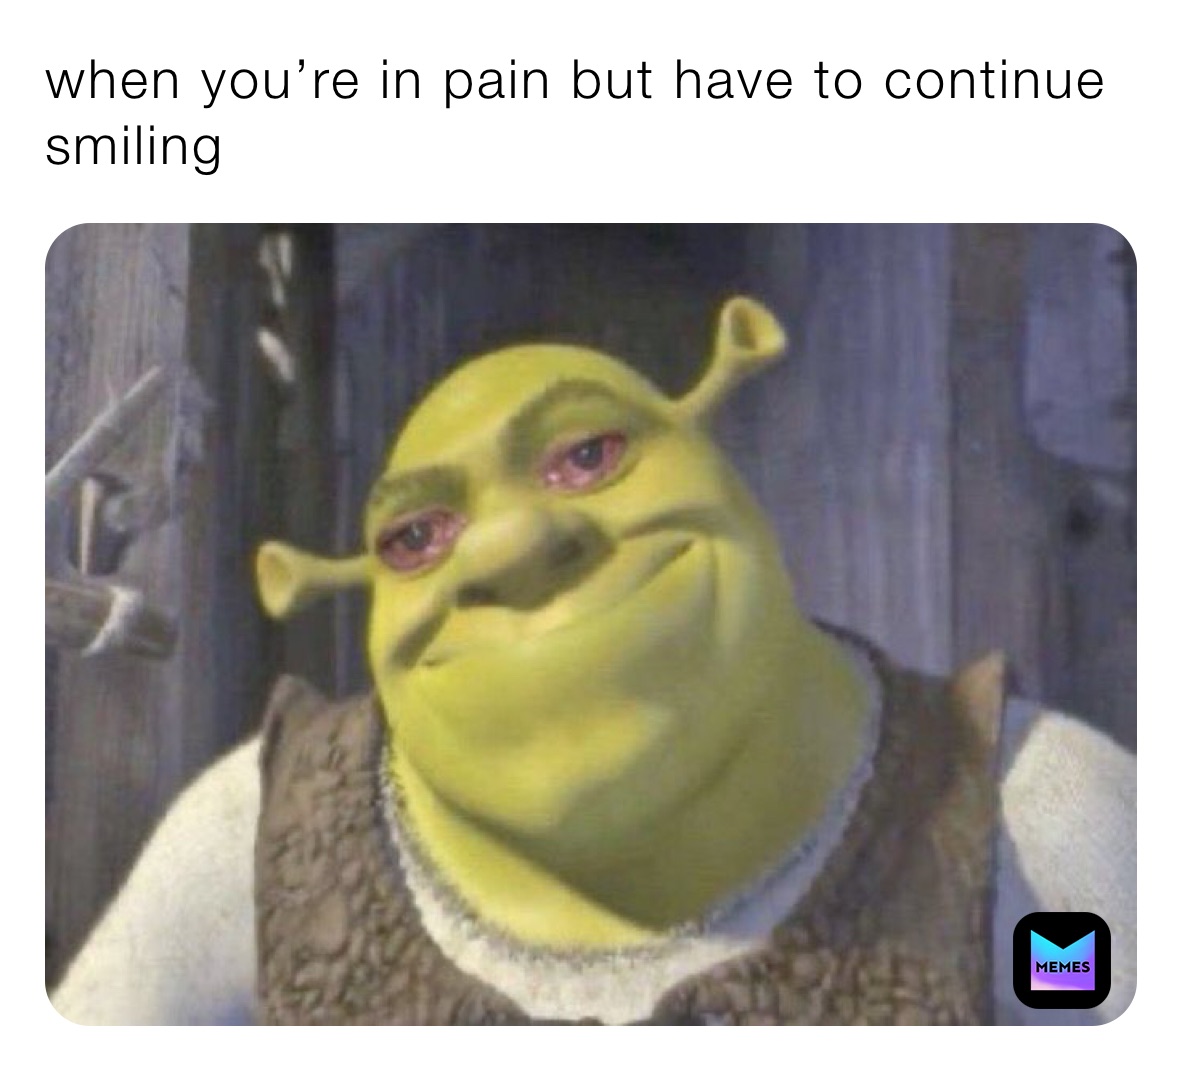 when you’re in pain but have to continue smiling